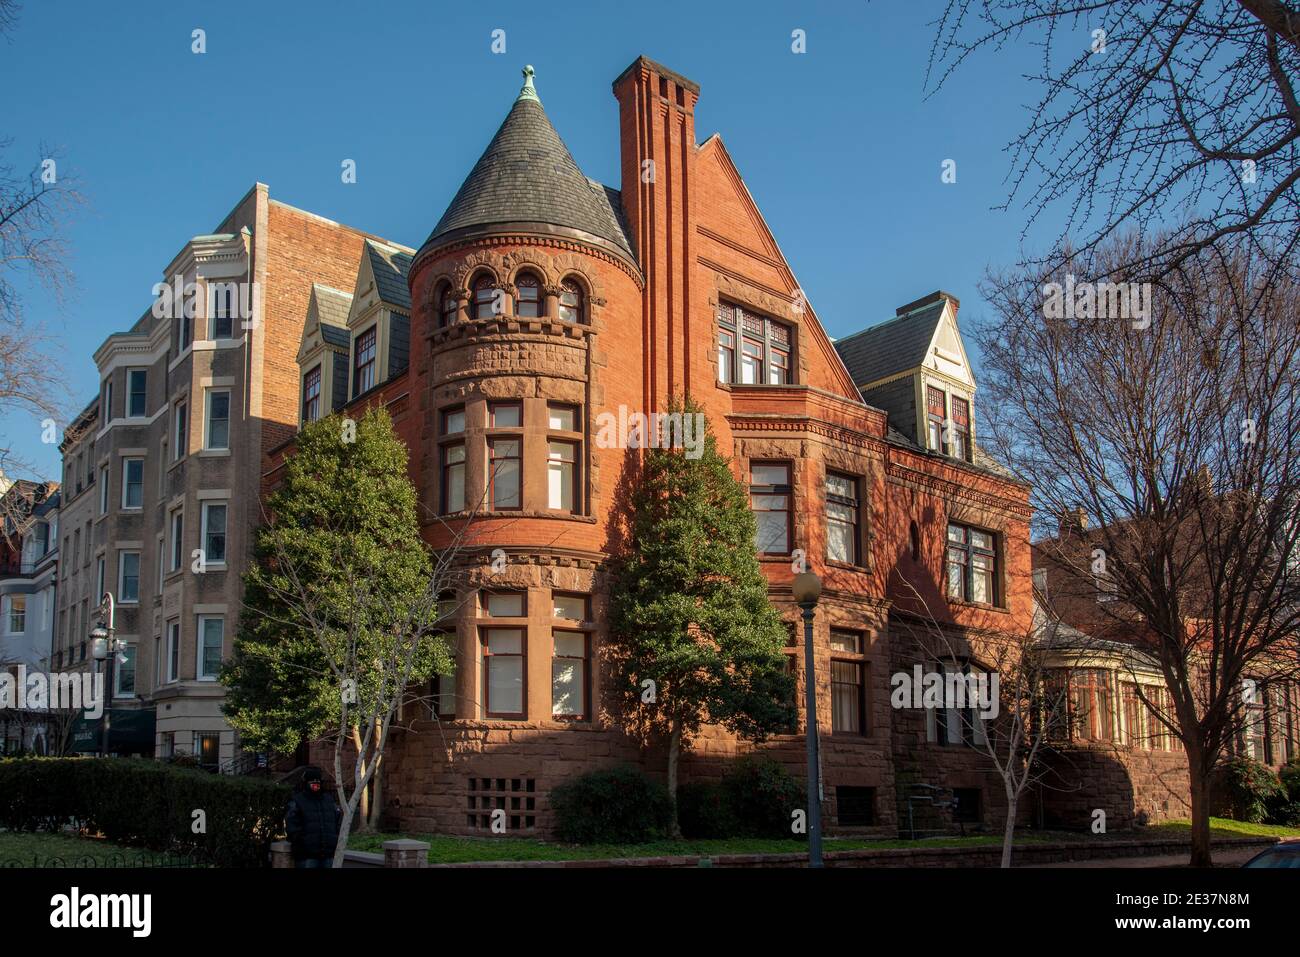 1623 16h St NW, Washington, DC. Built in 1886s, the mansion was home for 6 decades to socialite Gladys Hinckley Werlich who became the first DC woman Stock Photo